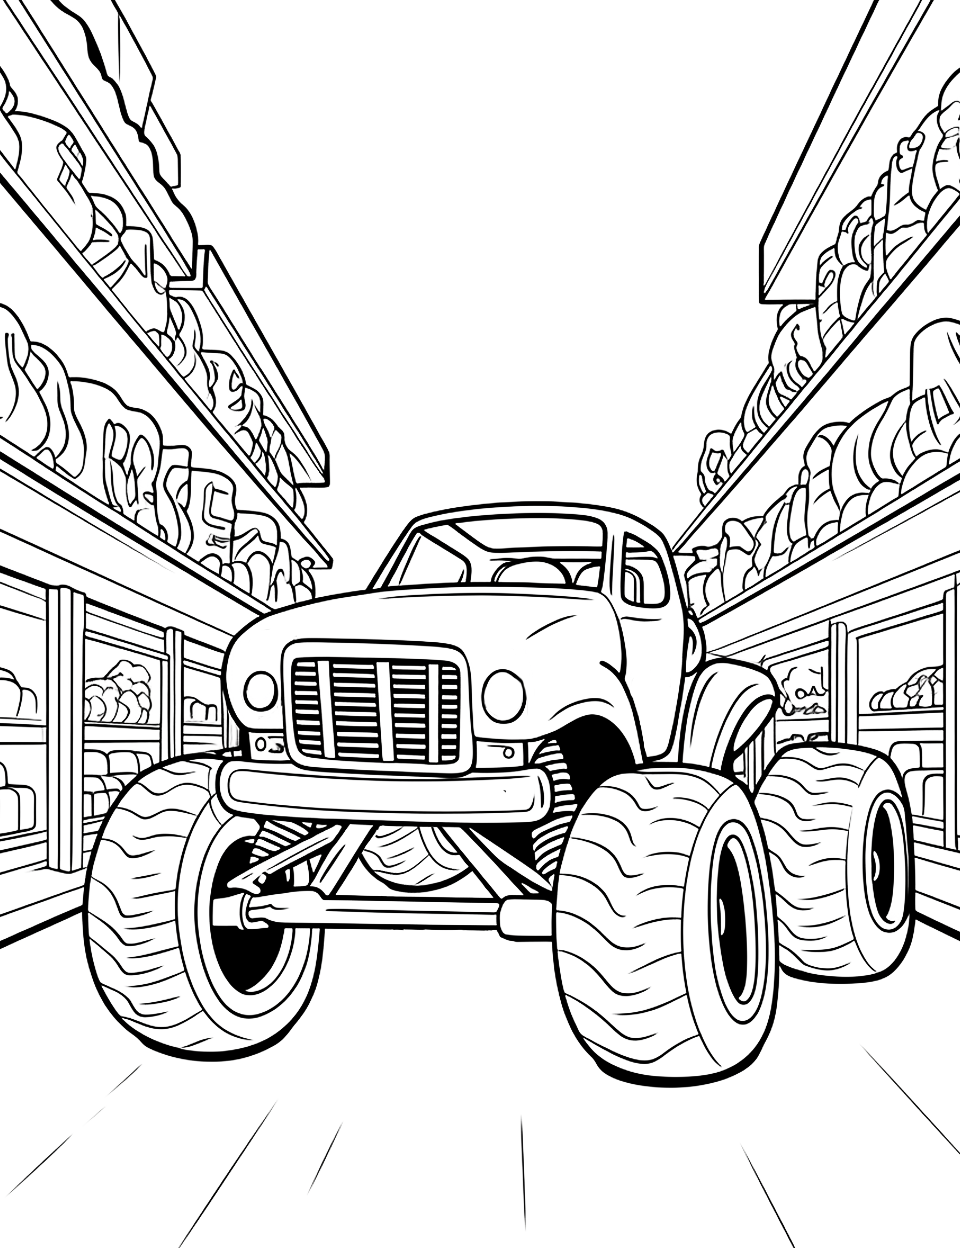 Toy Store Tango Monster Truck Coloring Page - A monster truck sitting between the aisles of a toy store.